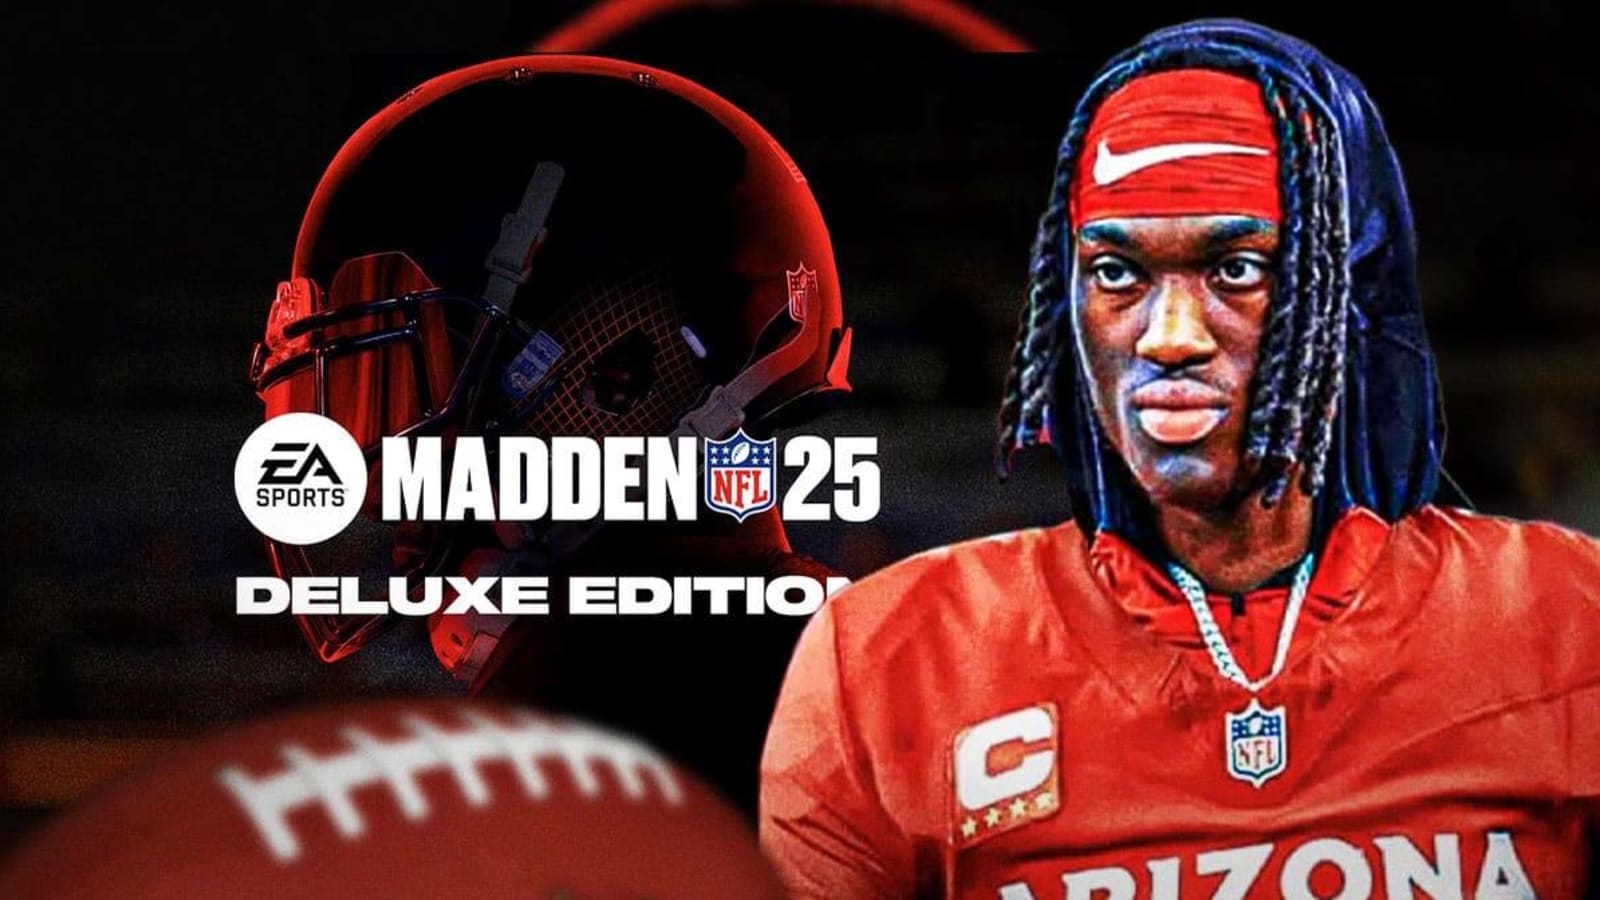 Cardinals’ WR Marvin Harrison Jr. Might Not Be In Madden 25